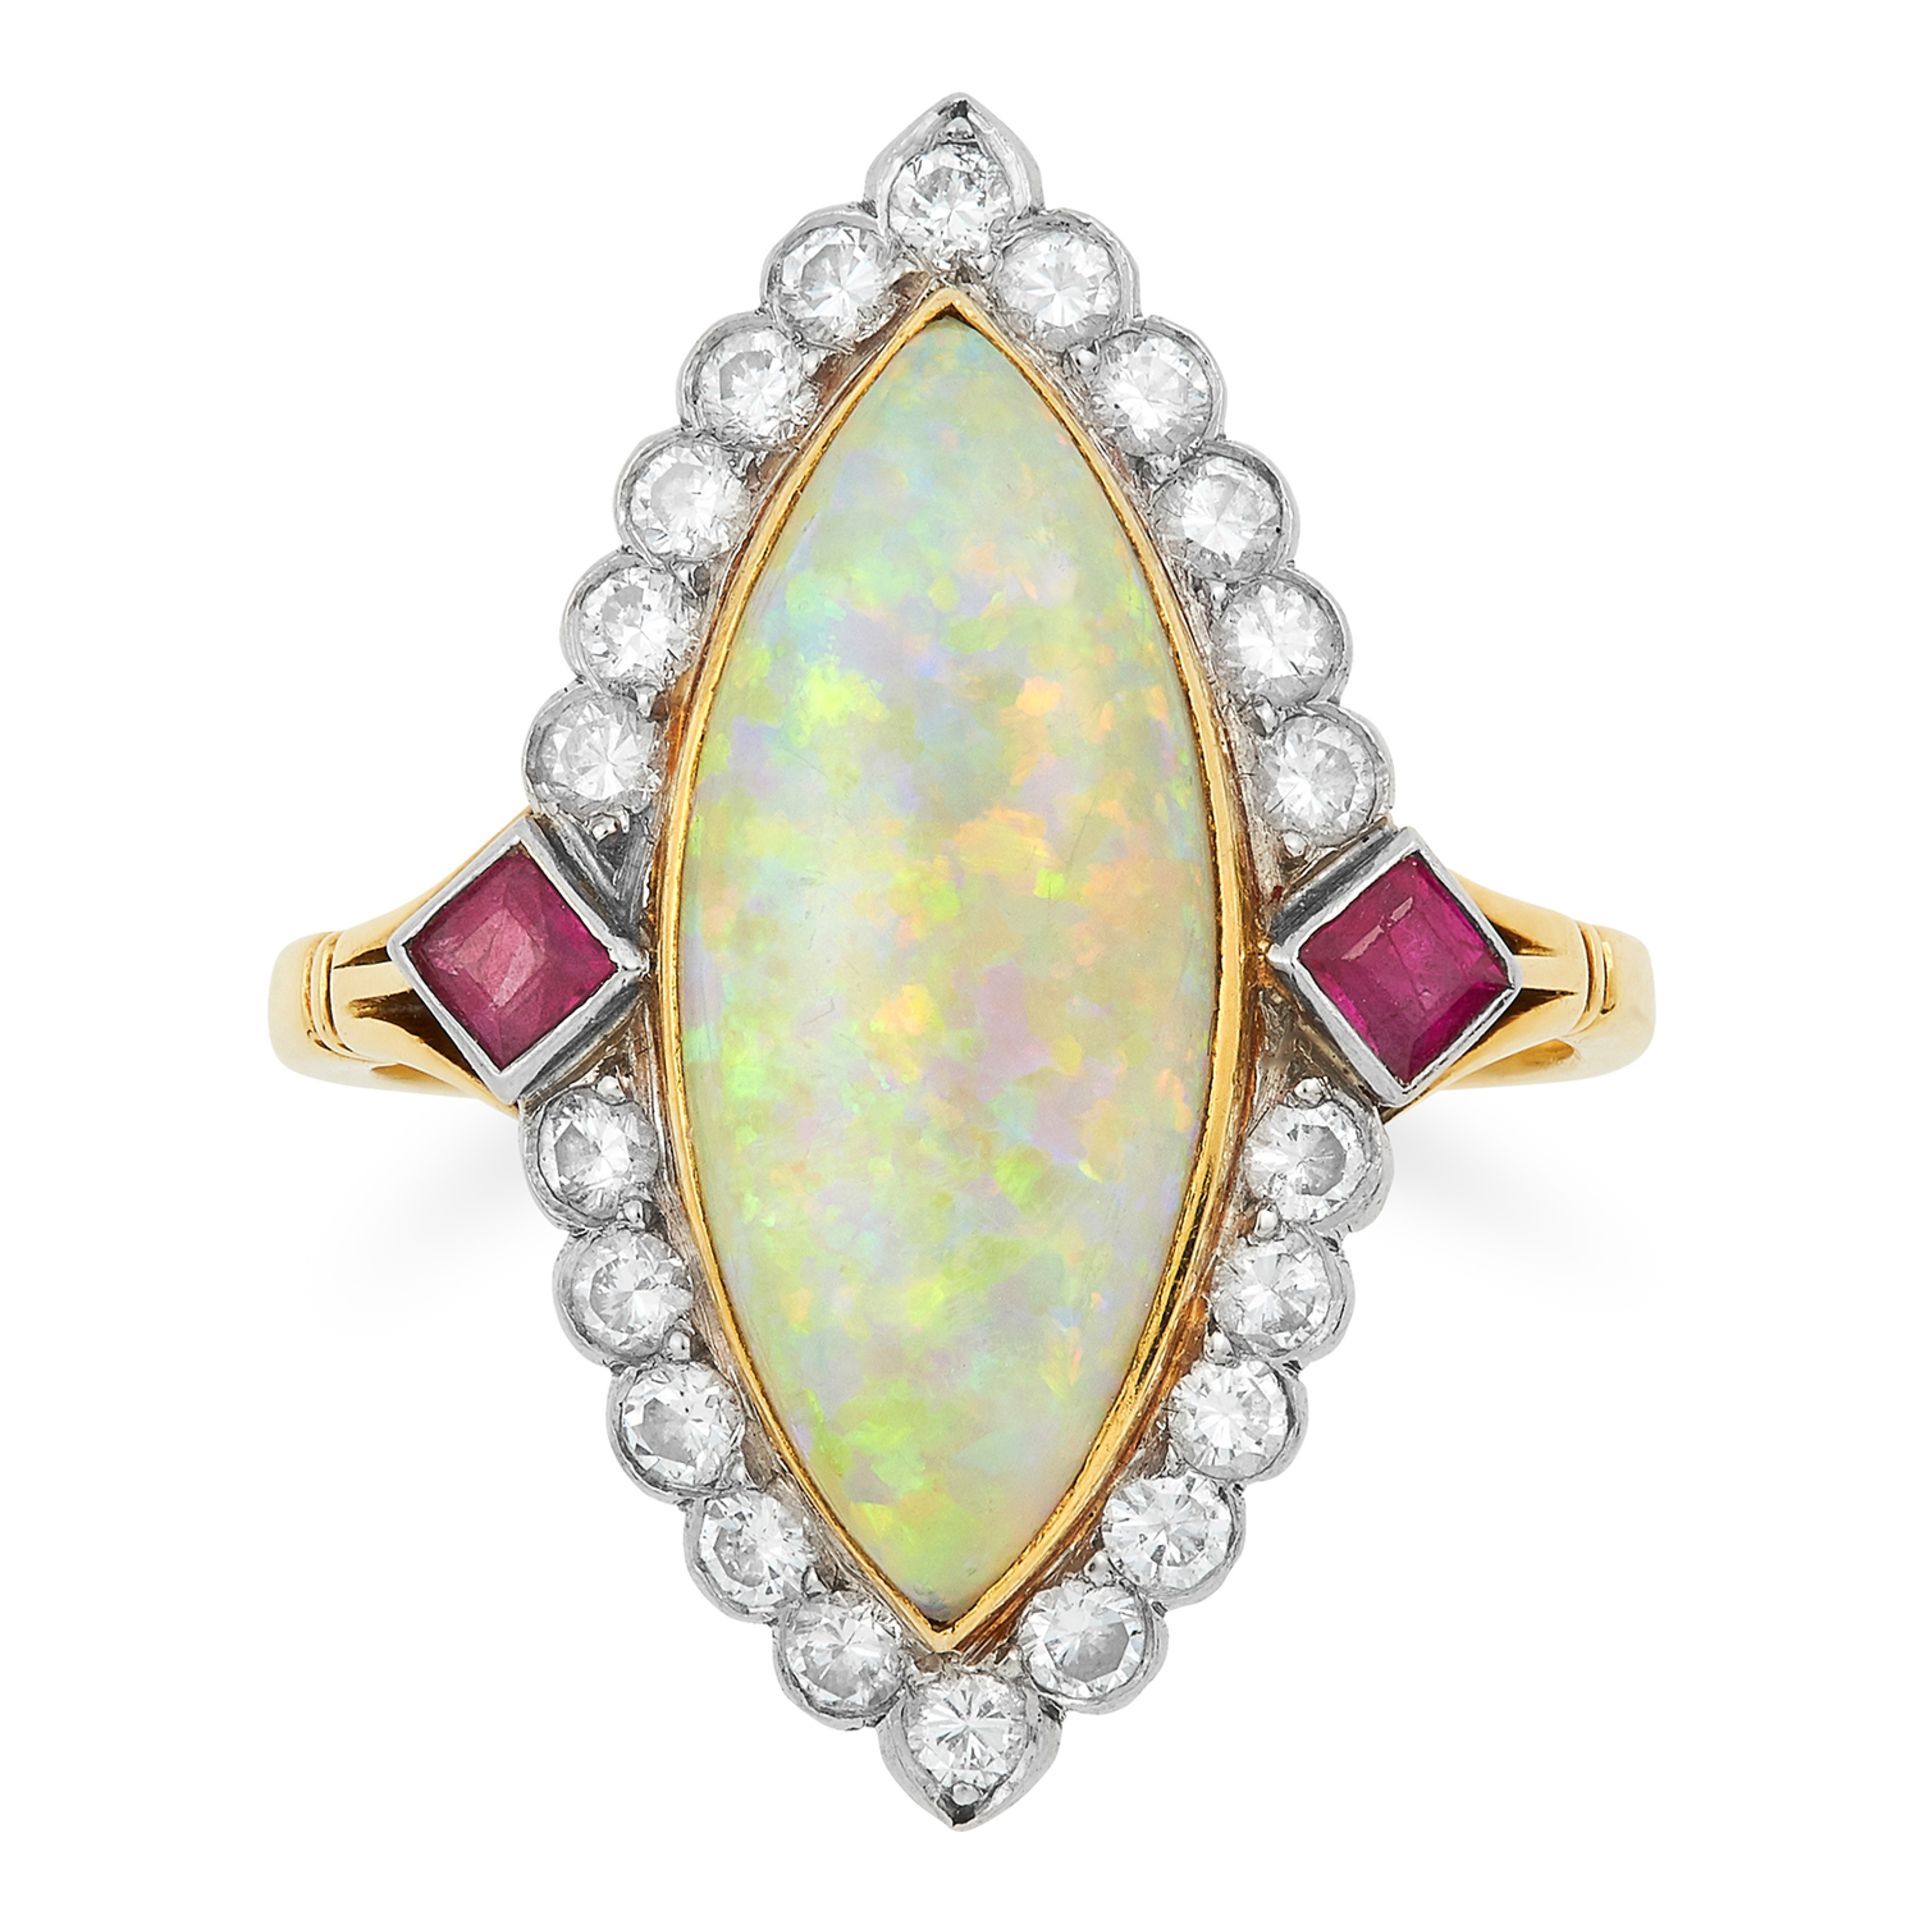 VINTAGE OPAL, DIAMOND AND RUBY CLUSTER RING set with a cabochon opal in a border of round cut